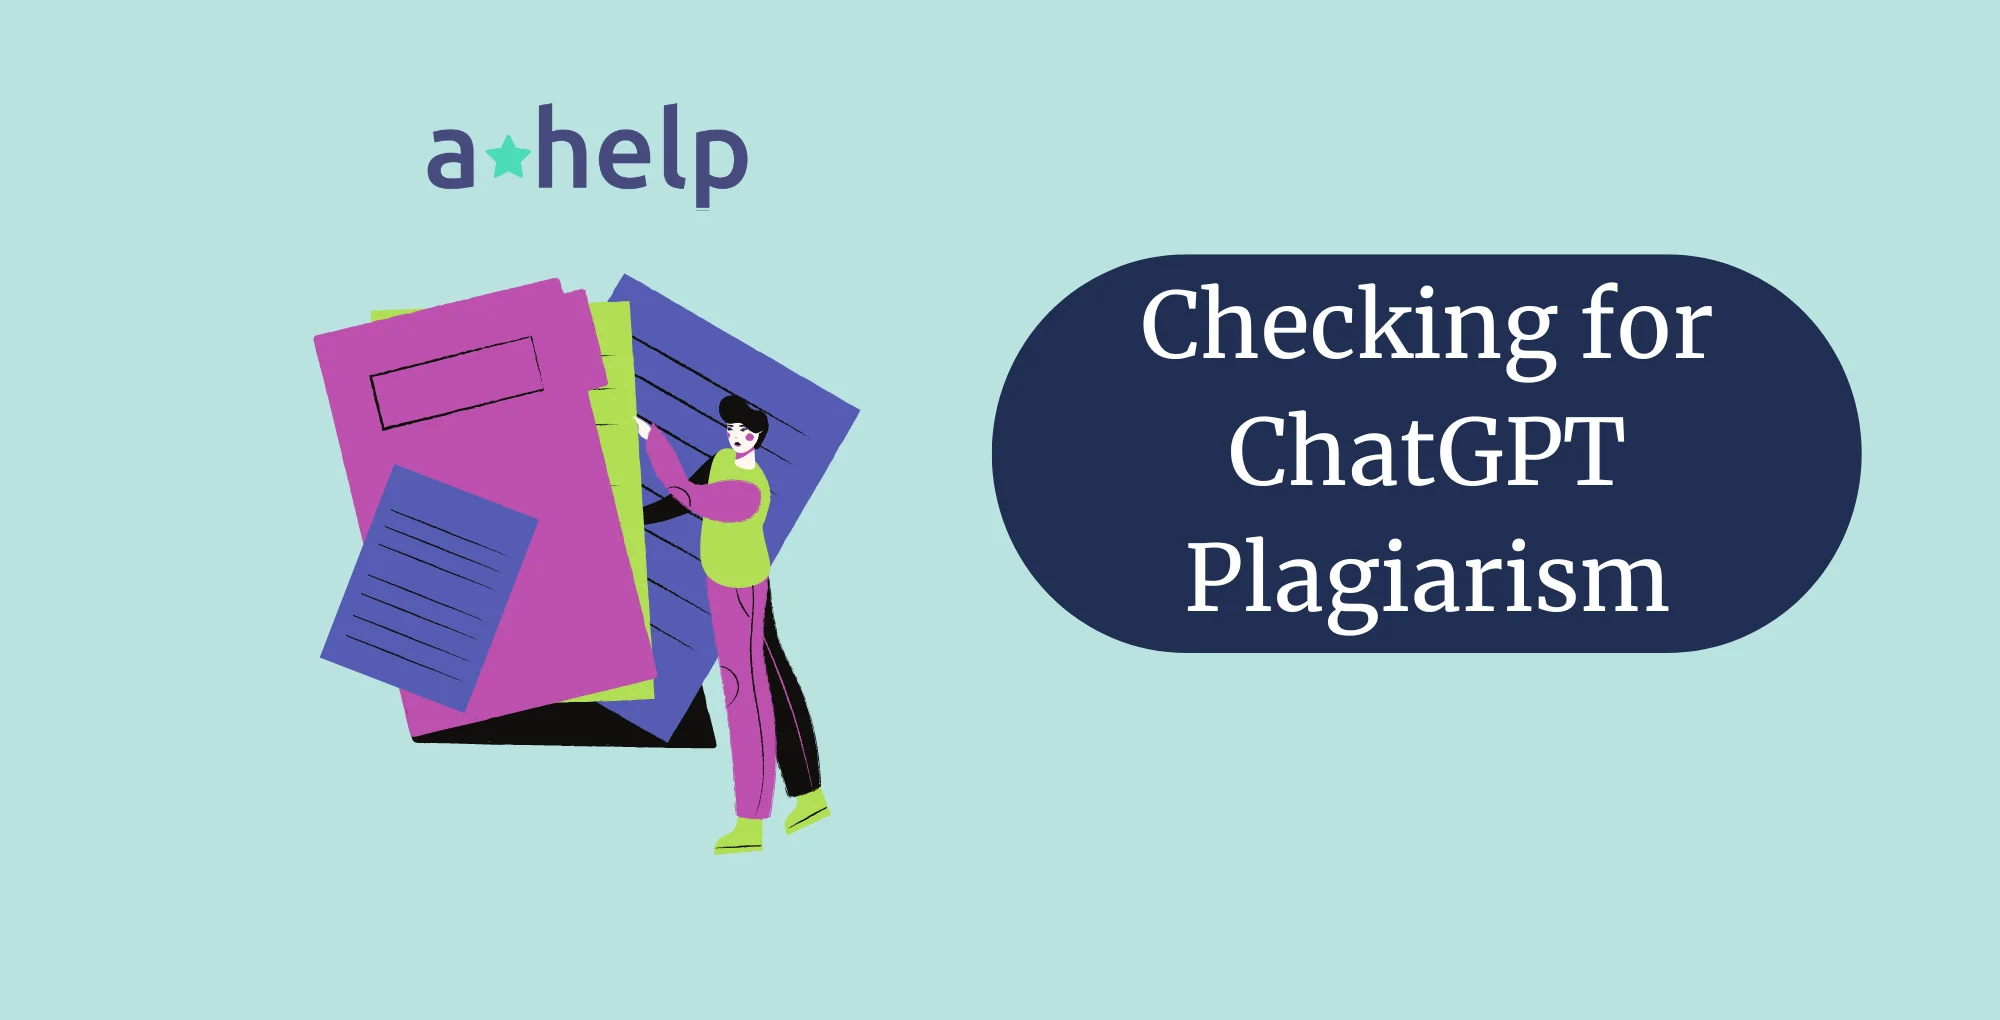 How to Check for Chat GPT Plagiarism